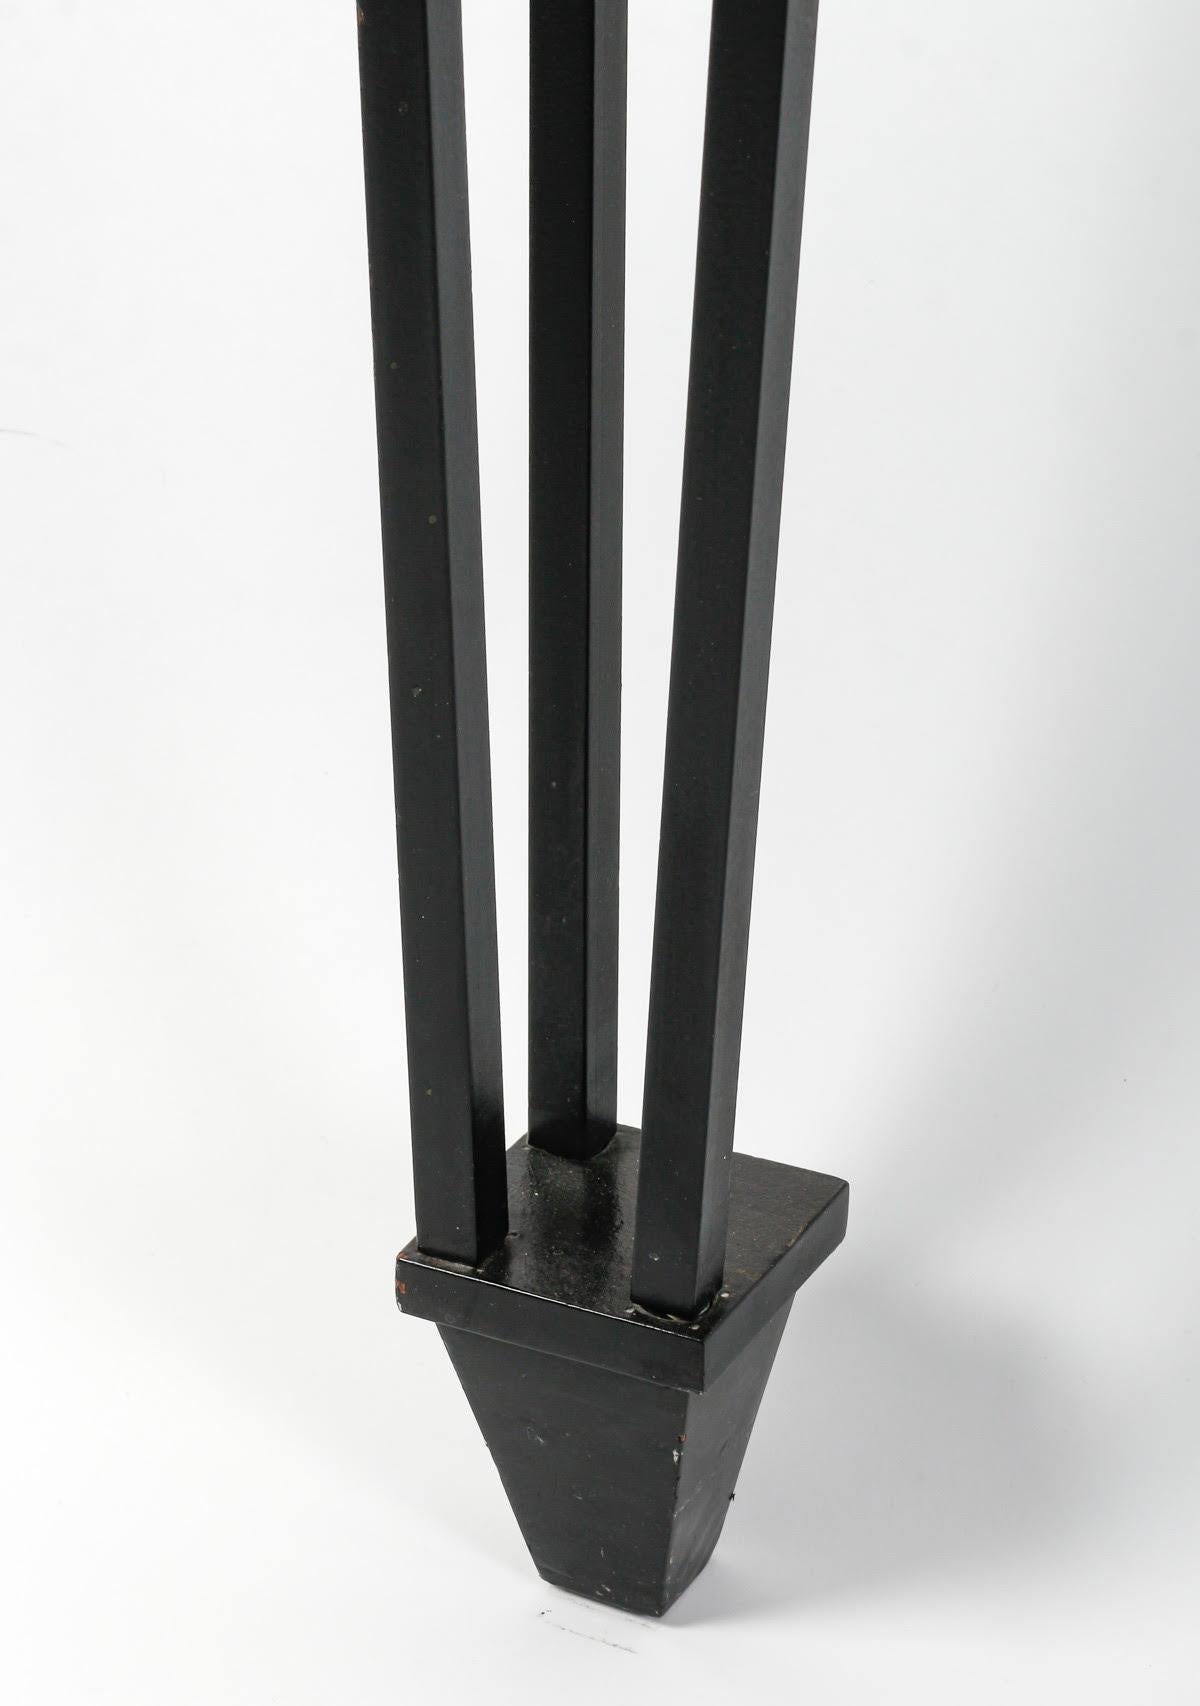 Wrought iron console in the Neo-Classical taste, 20th century.

Wrought-iron console in the Neo-Classical style, without the marble, painted black, 20th century.

Dimensions: h: 88cm, w: 109cm, d: 33.5cm